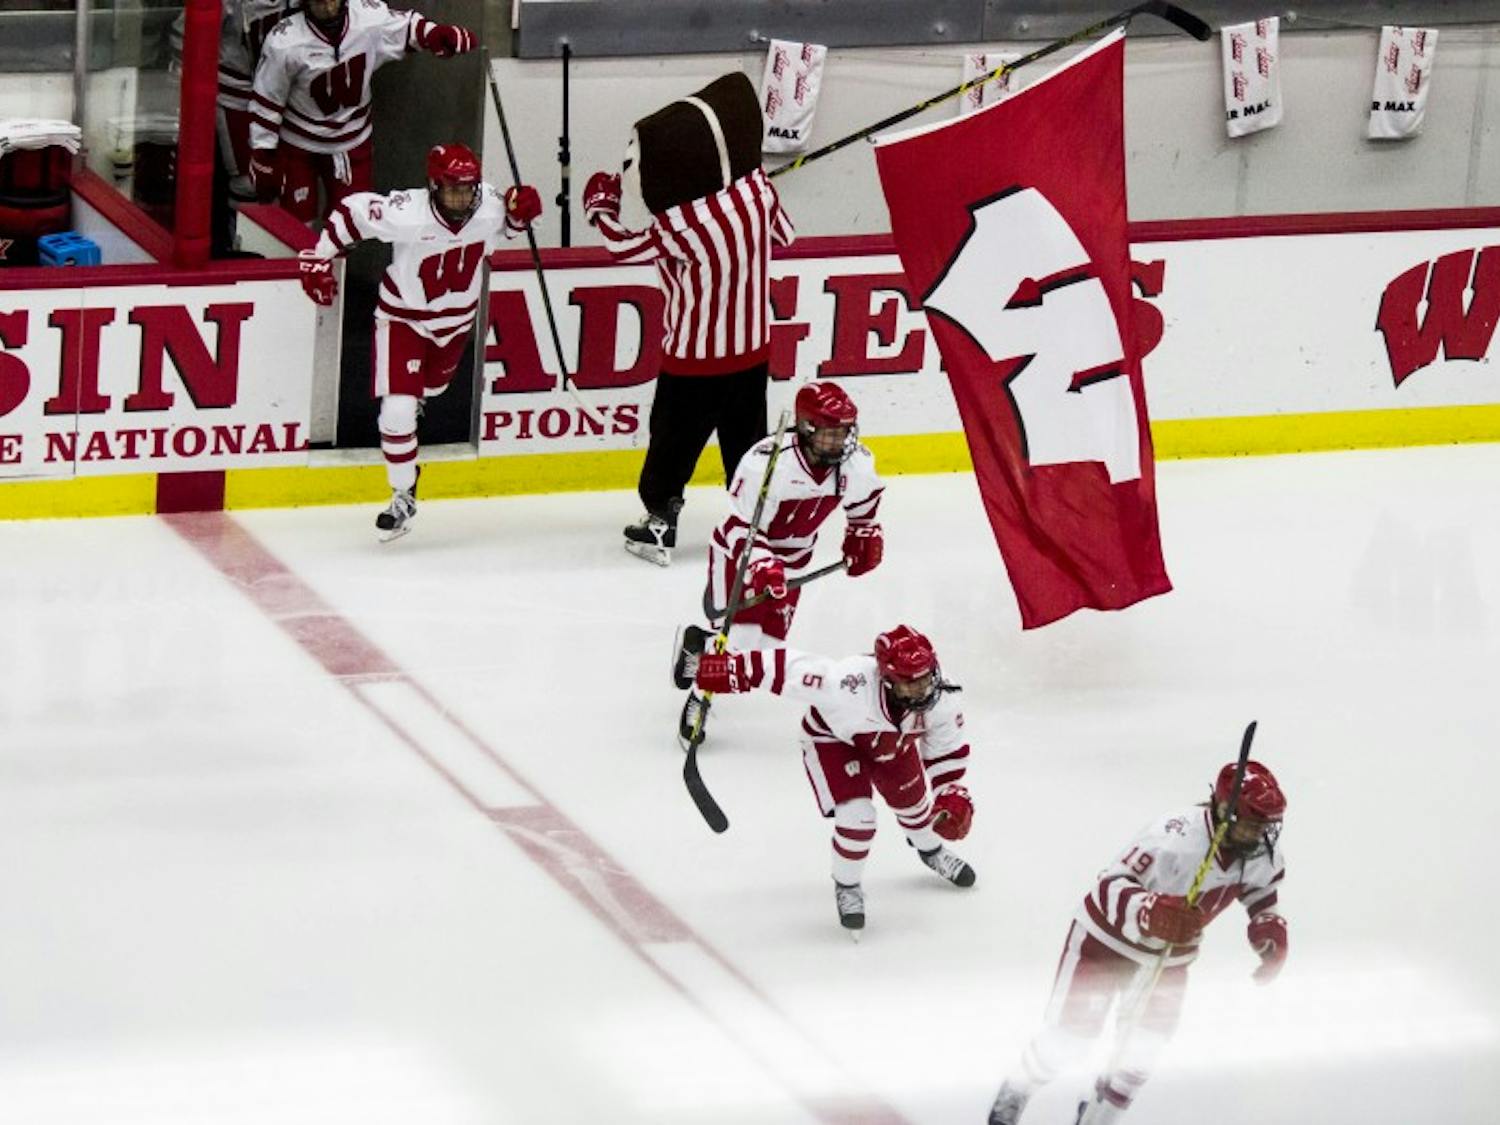 Wisconsin has an unprecedented 18-0-0 record at home and a 10-3-1 mark when it's on the road.